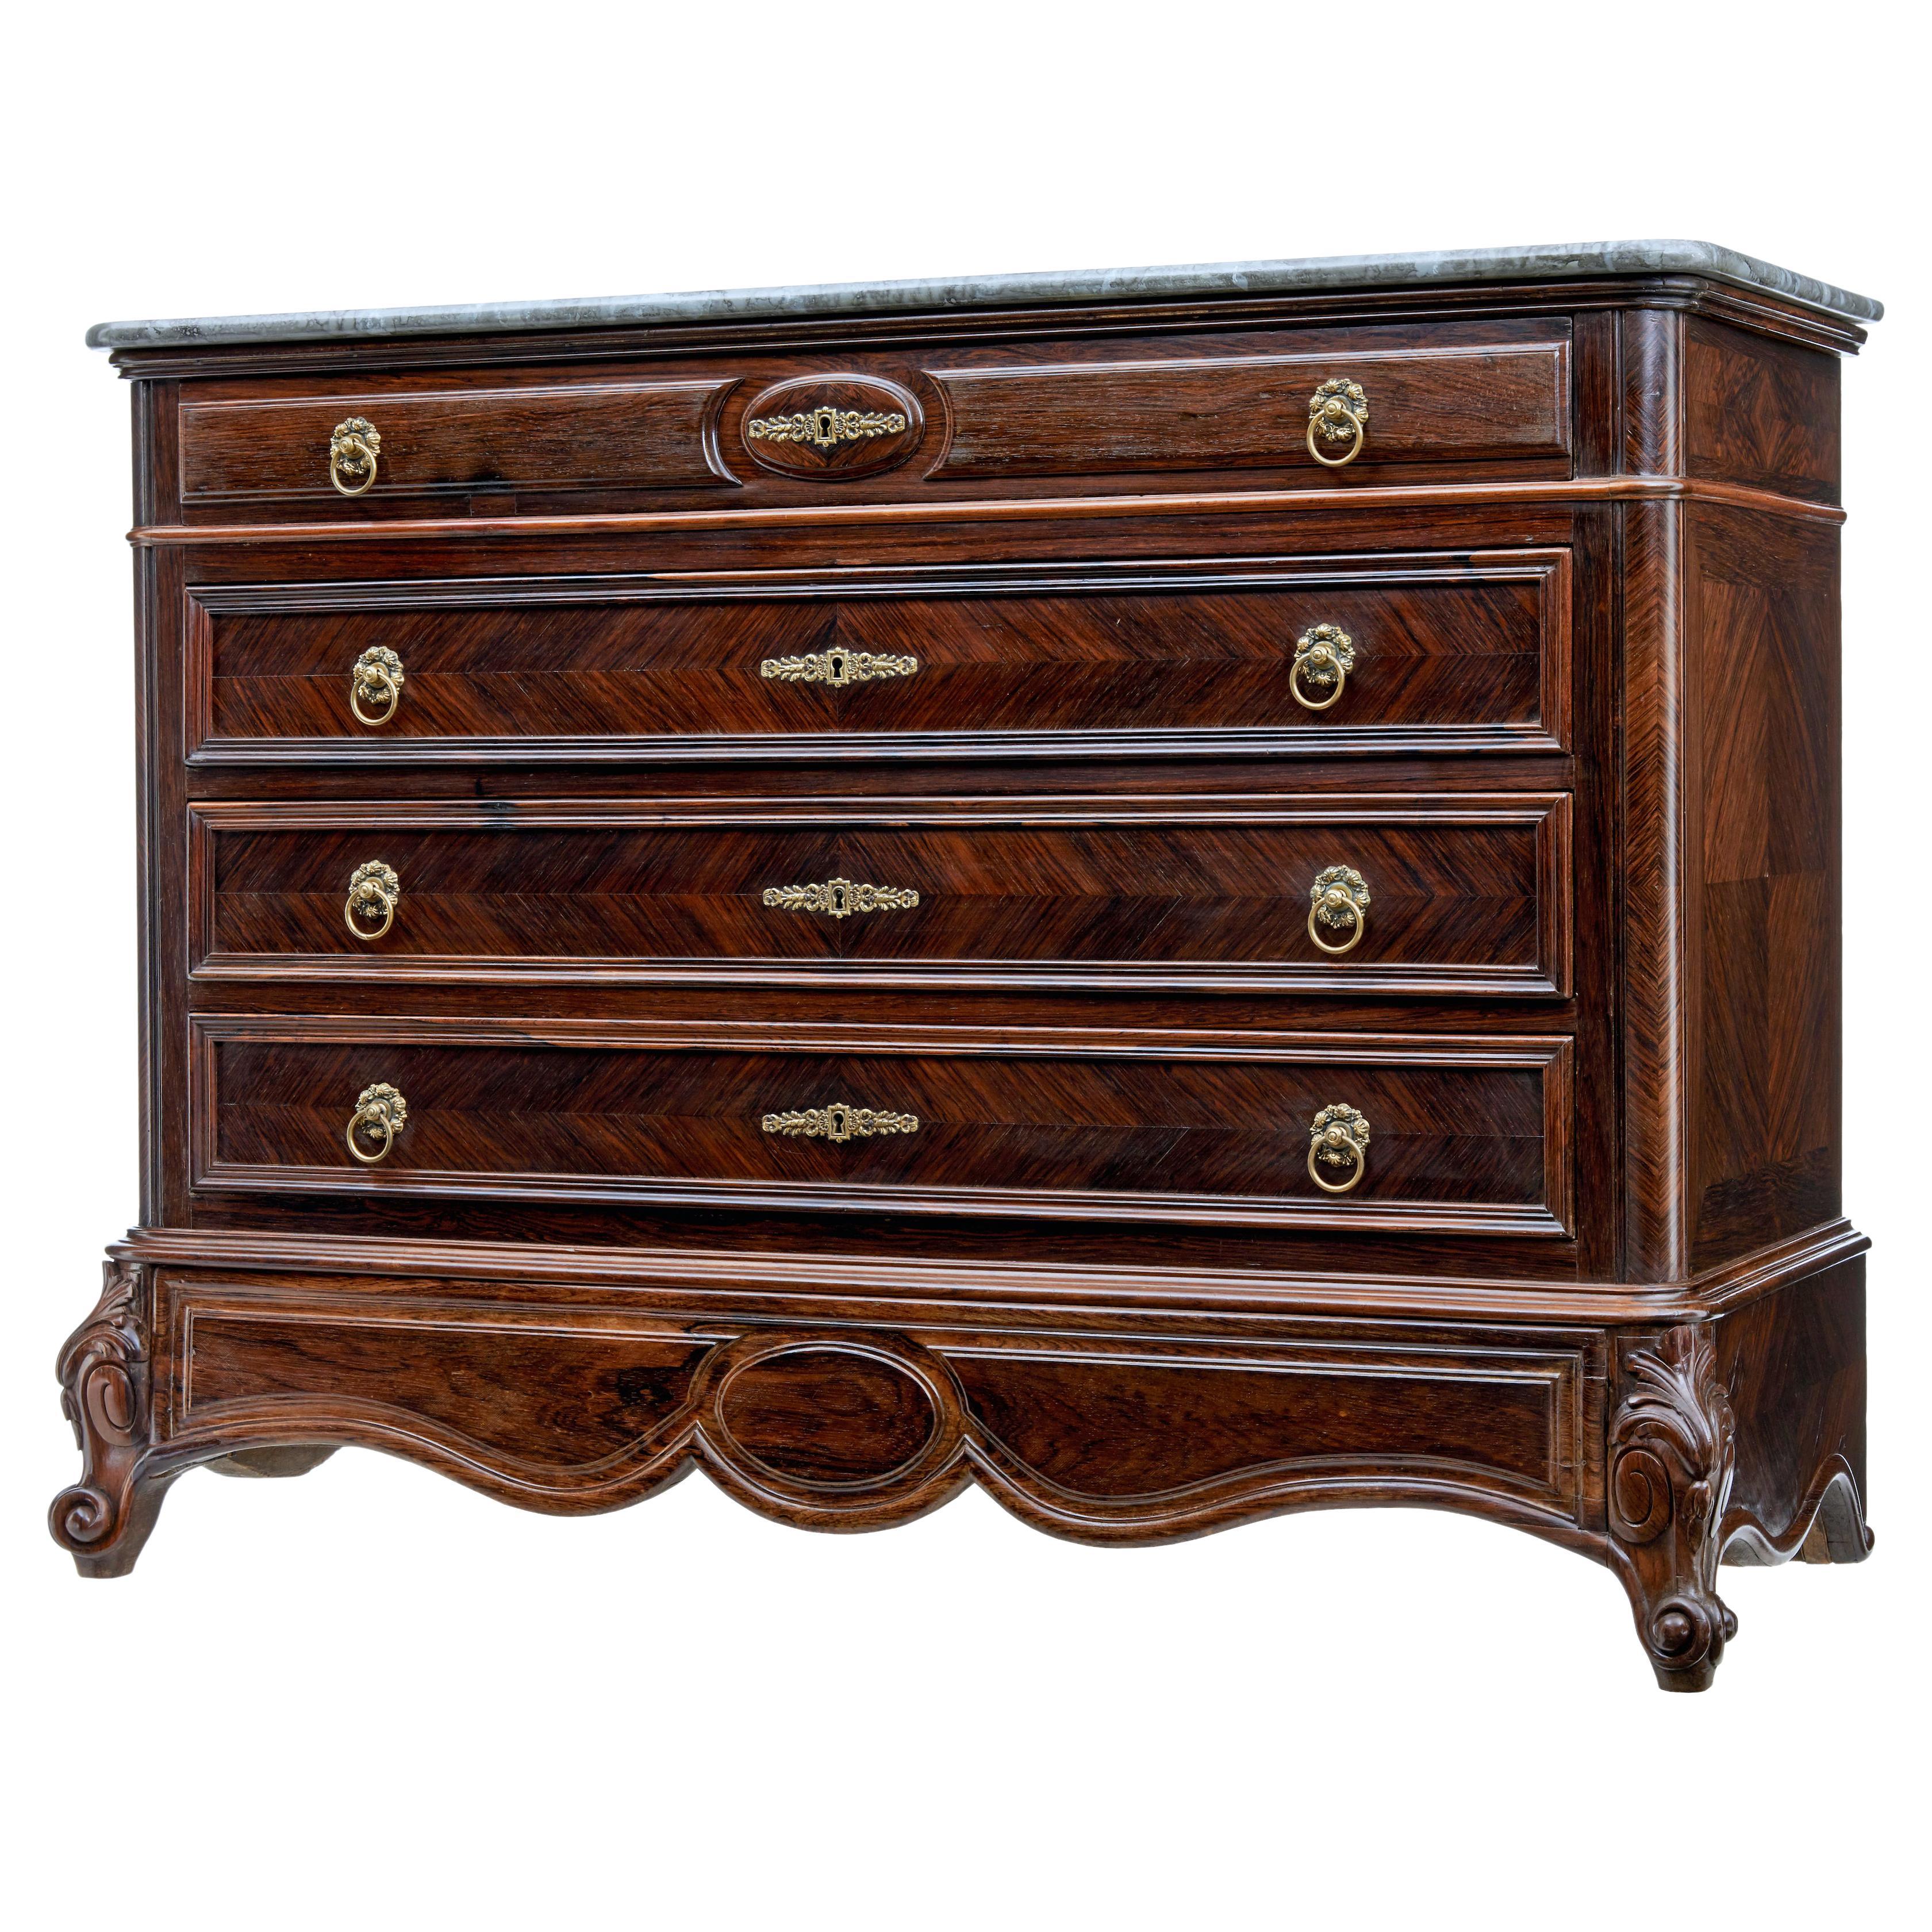 Large 19th Century French Palisander Chest of Drawers